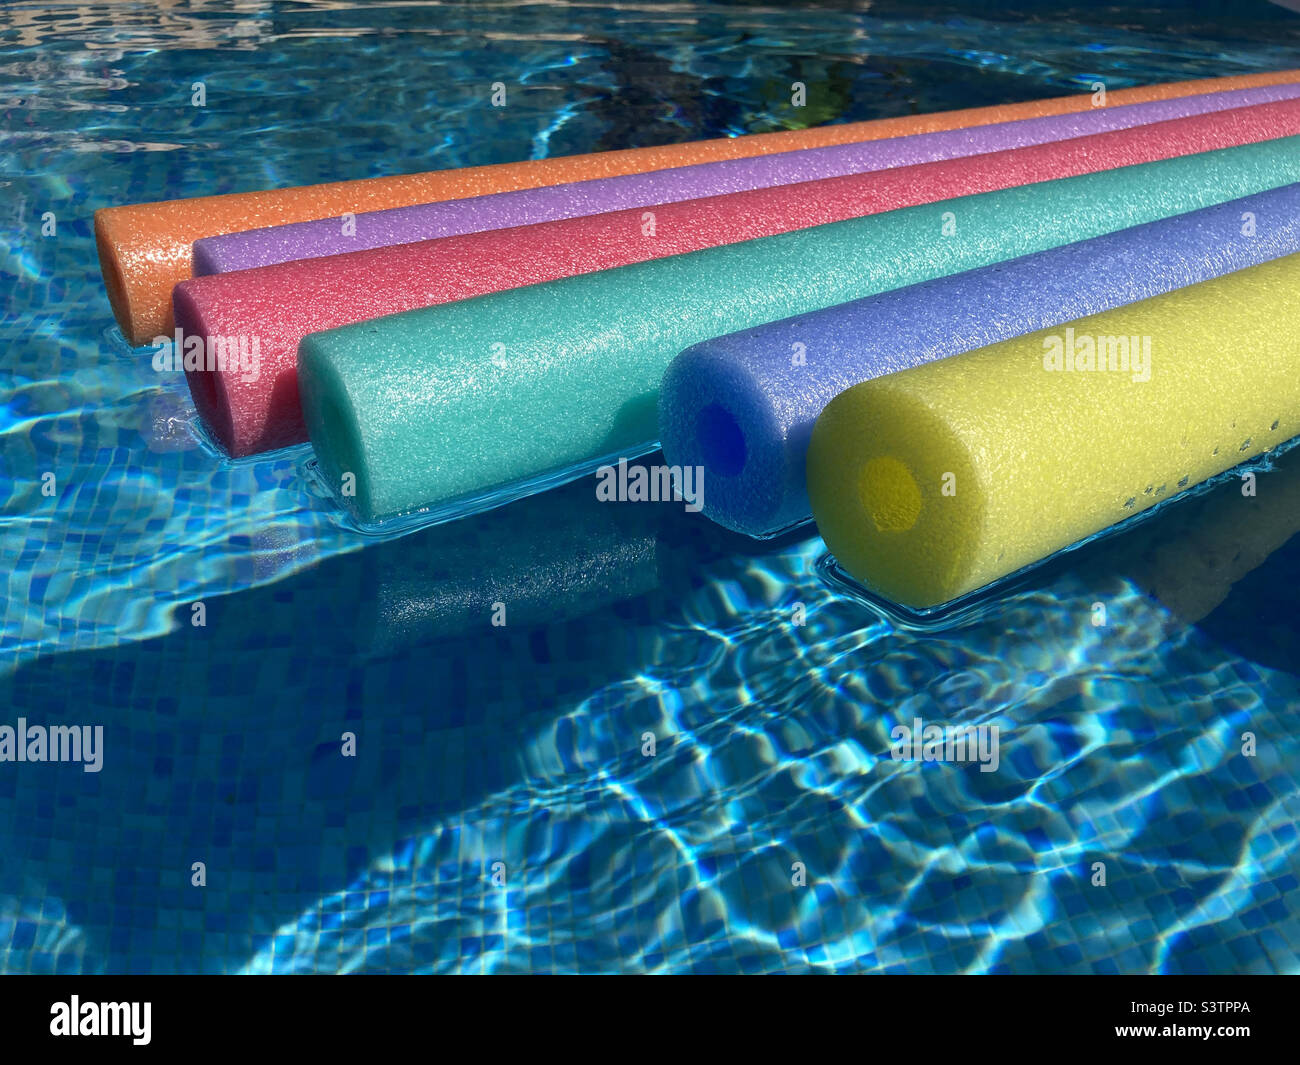 Rainbow coloured pool noodles floating in sparkling water of swimming pool. Stock Photo